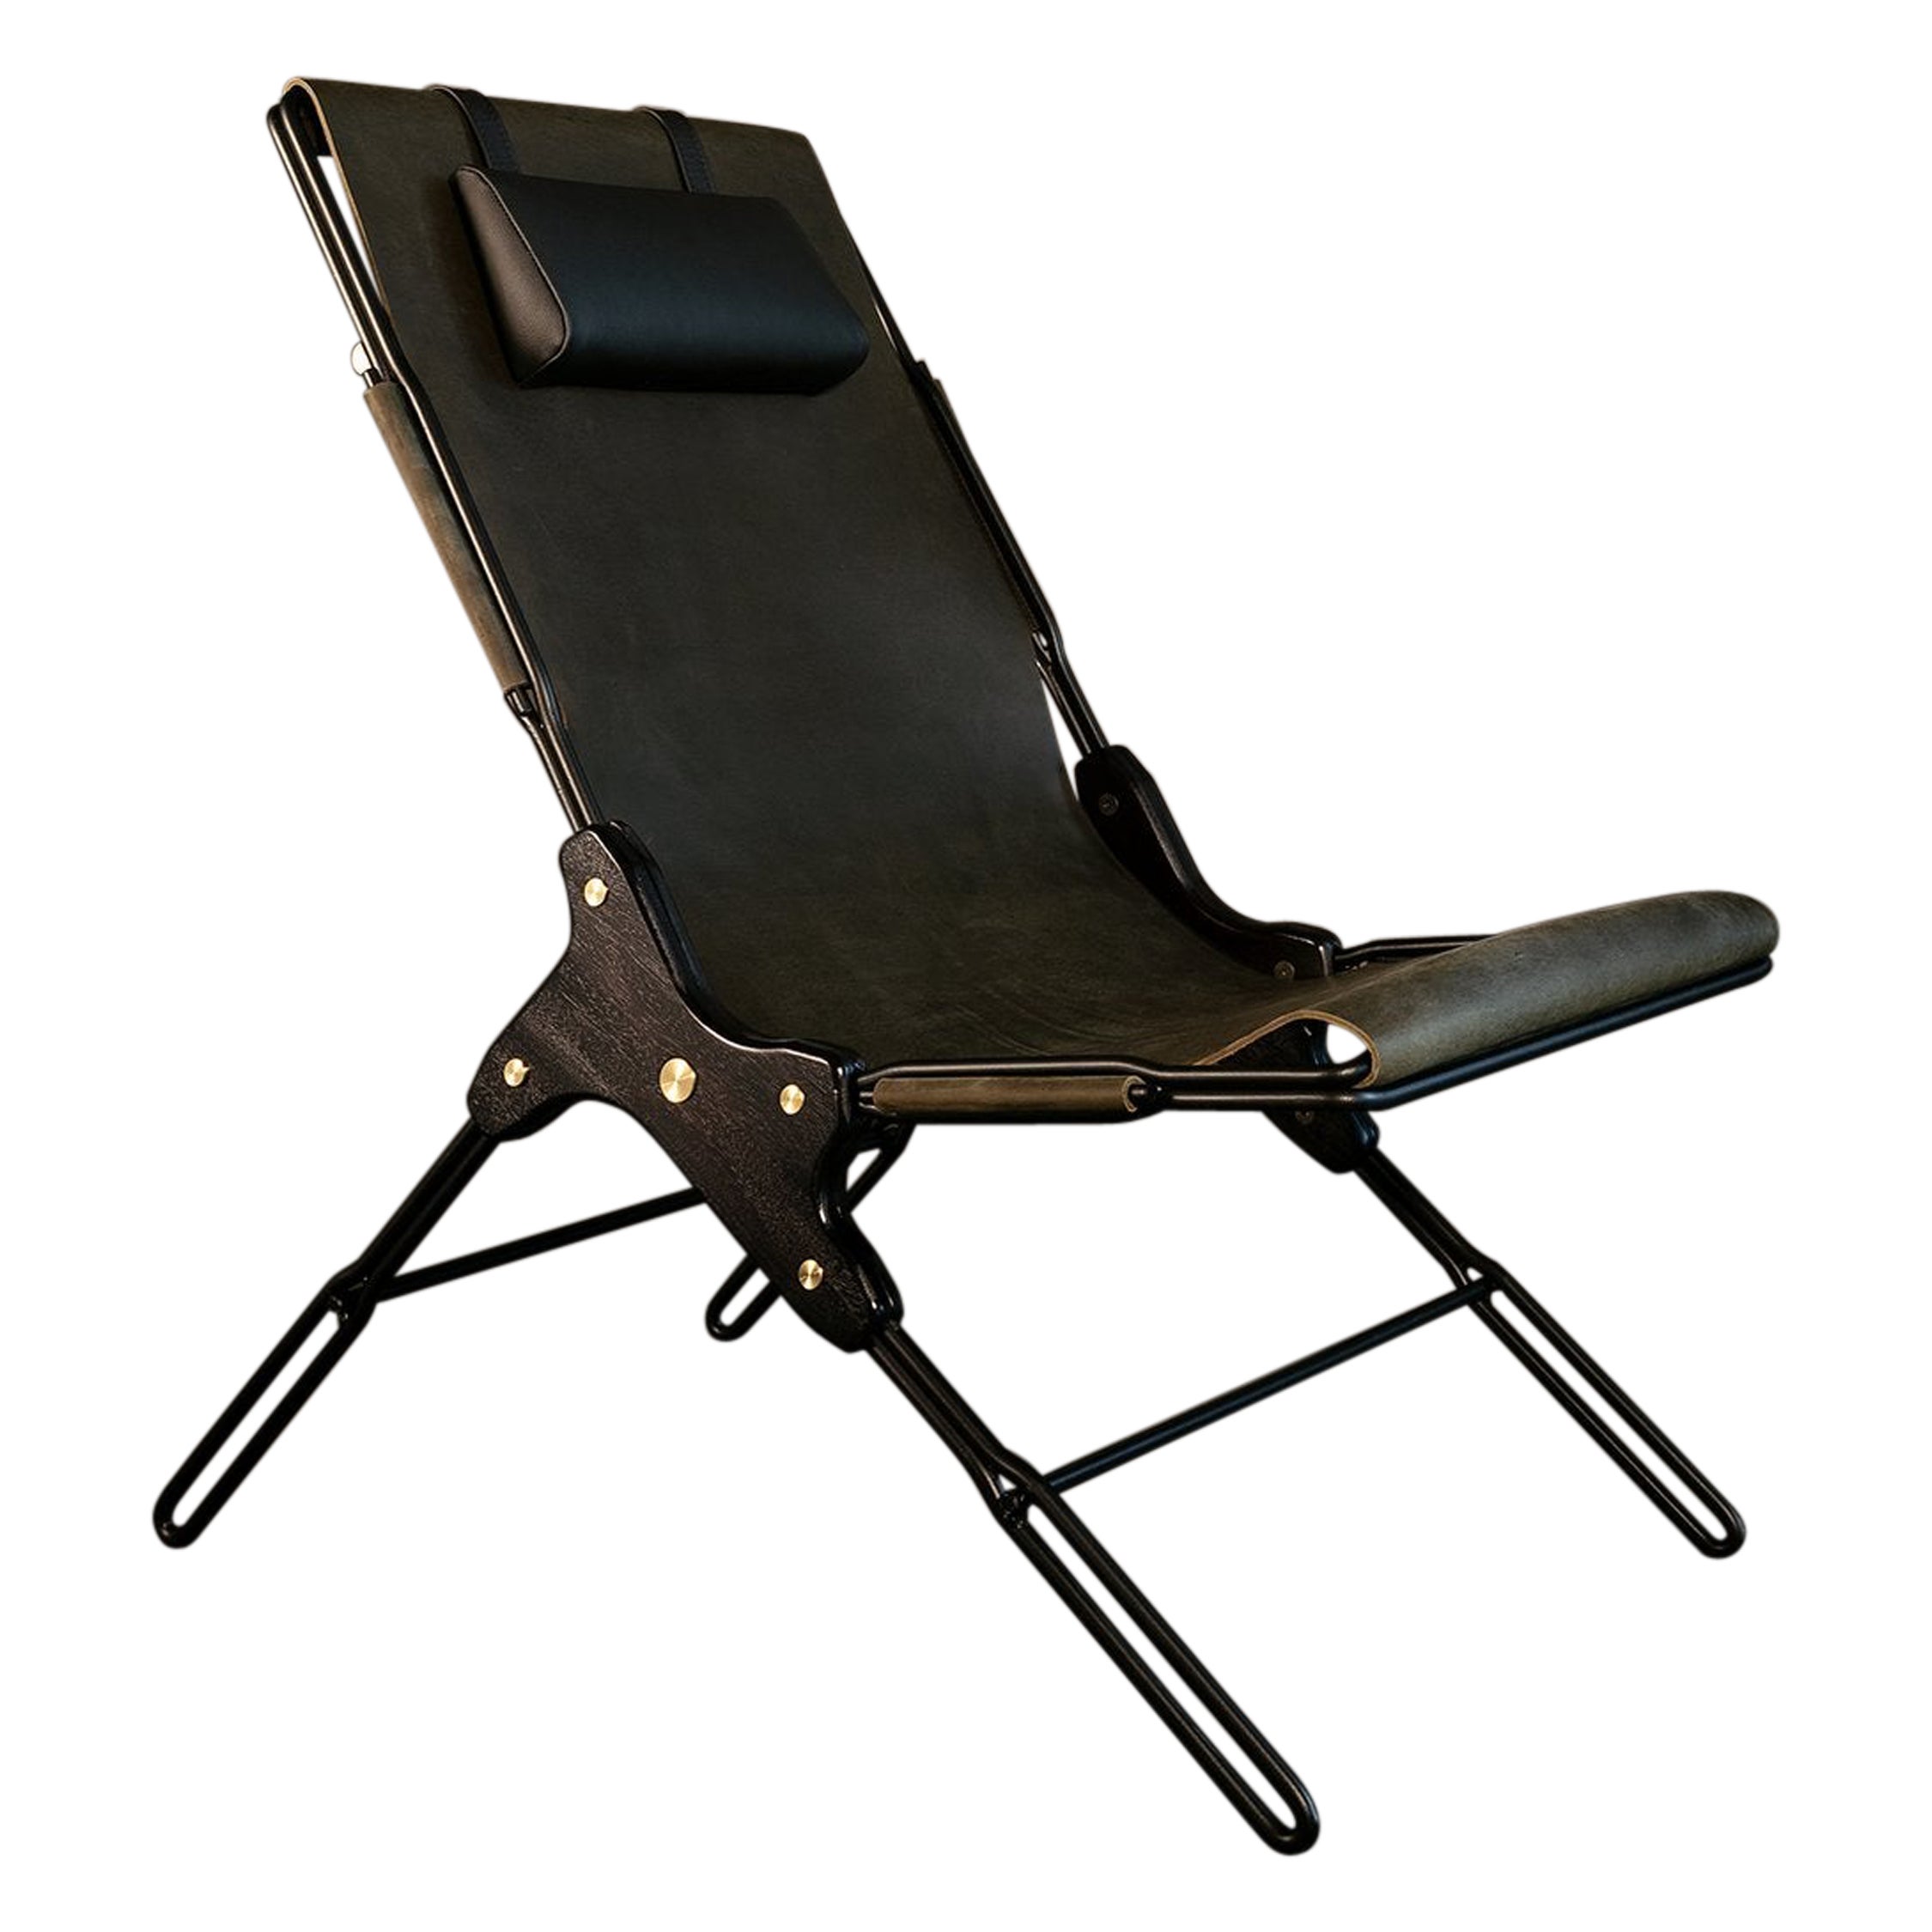 Perfidia_01 Lounge Chair Olivo by ANDEAN, REP by Tuleste Factory For Sale